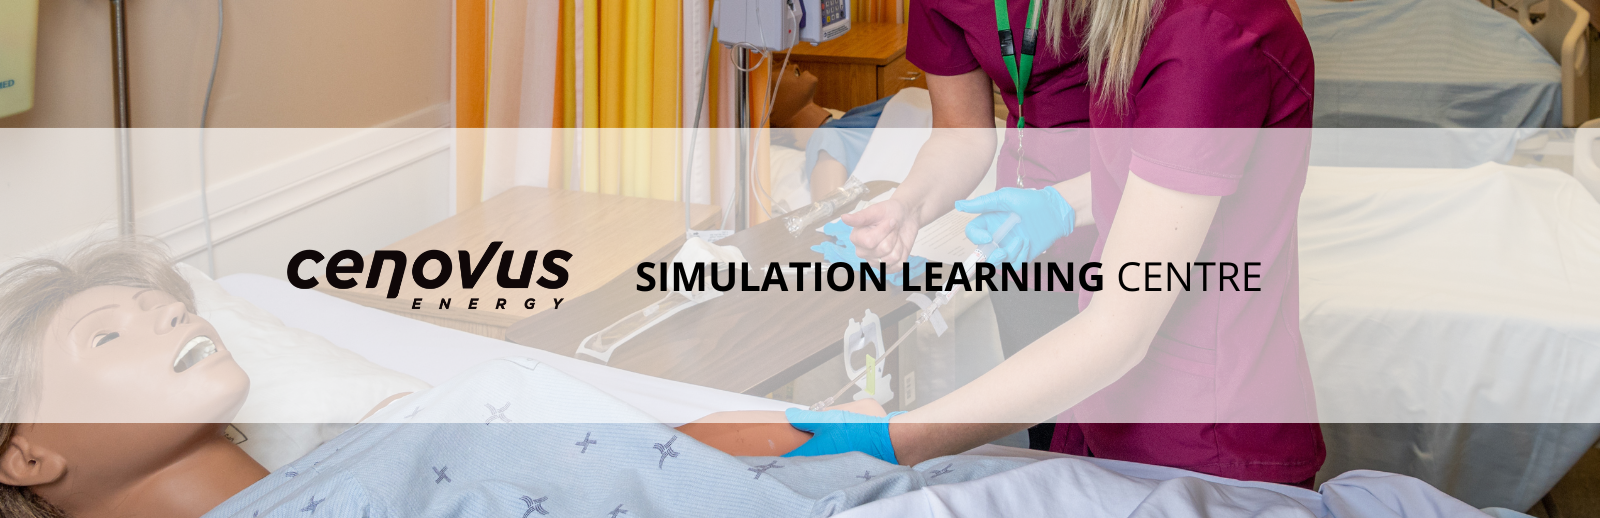 Simulation Learning Centre Header